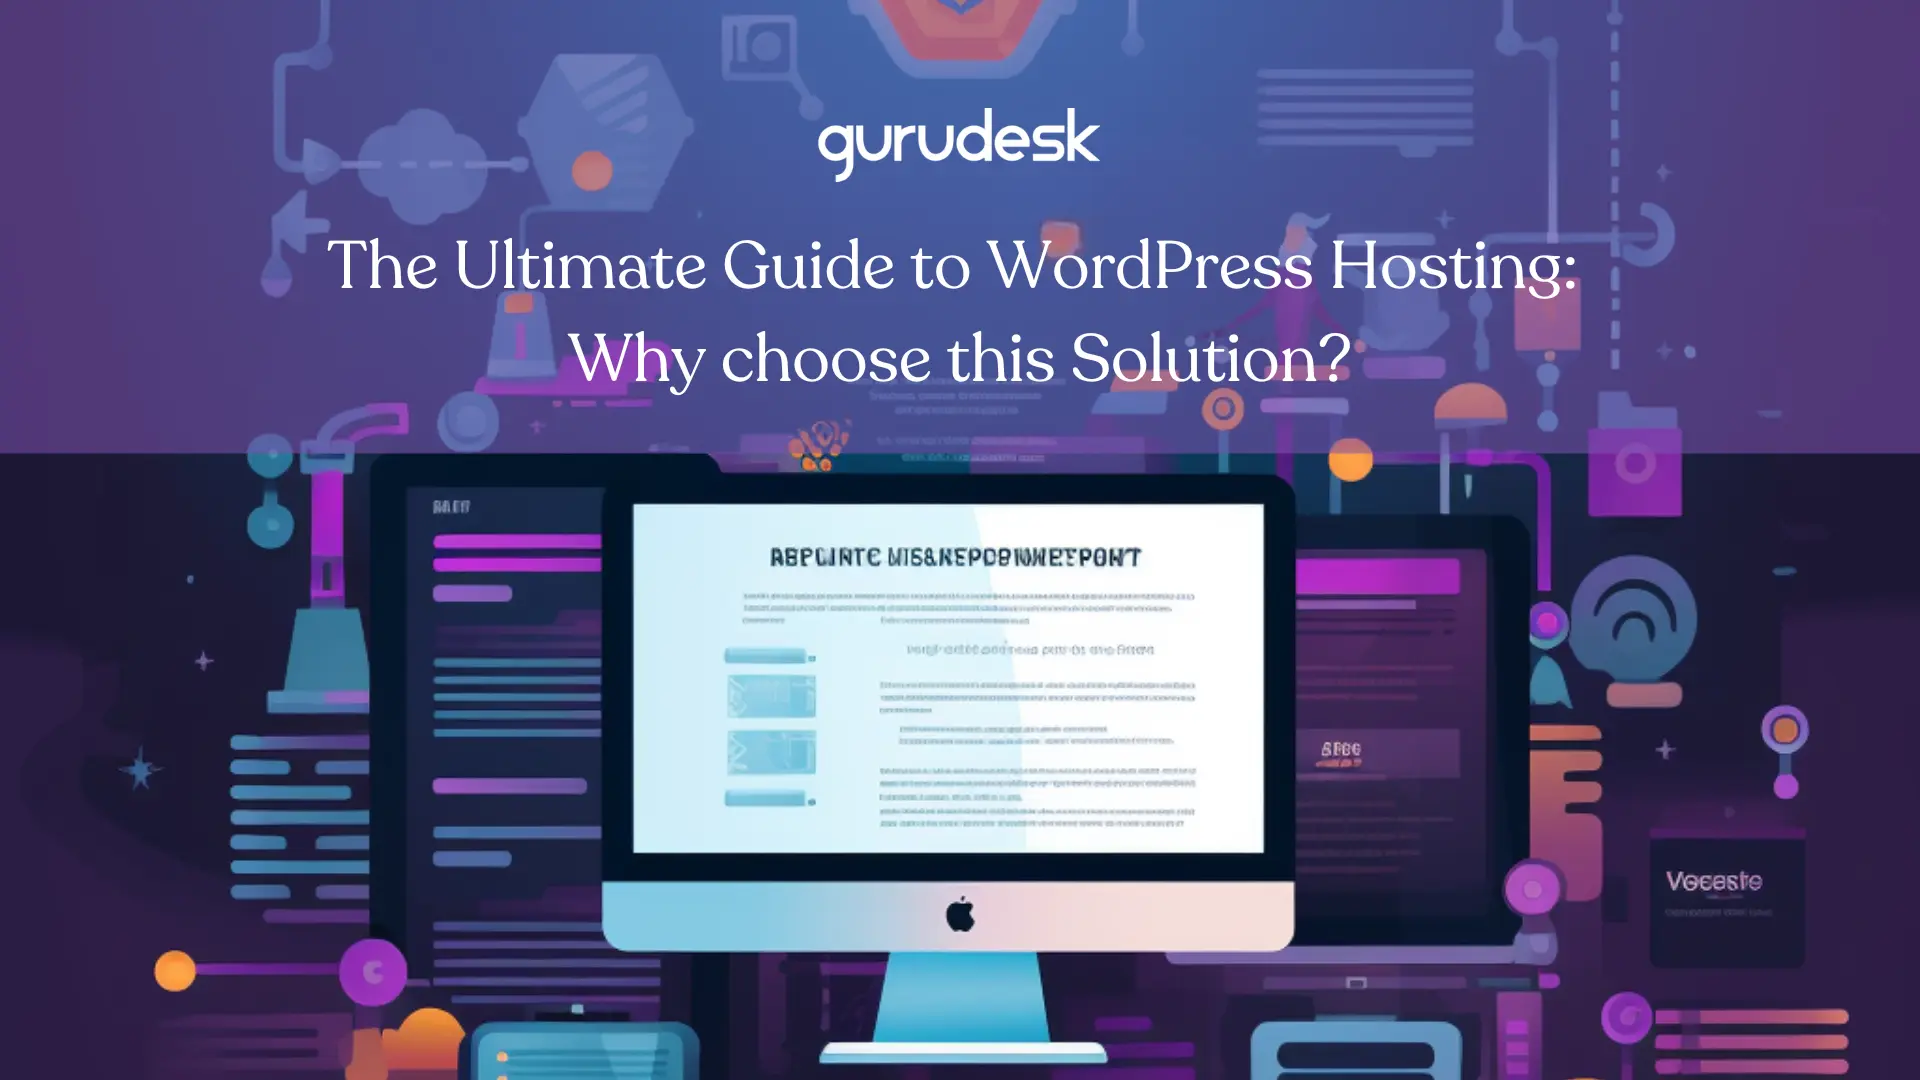 The Ultimate Guide to WordPress Hosting WordPress Guru Guru Desk WordPress WordPress